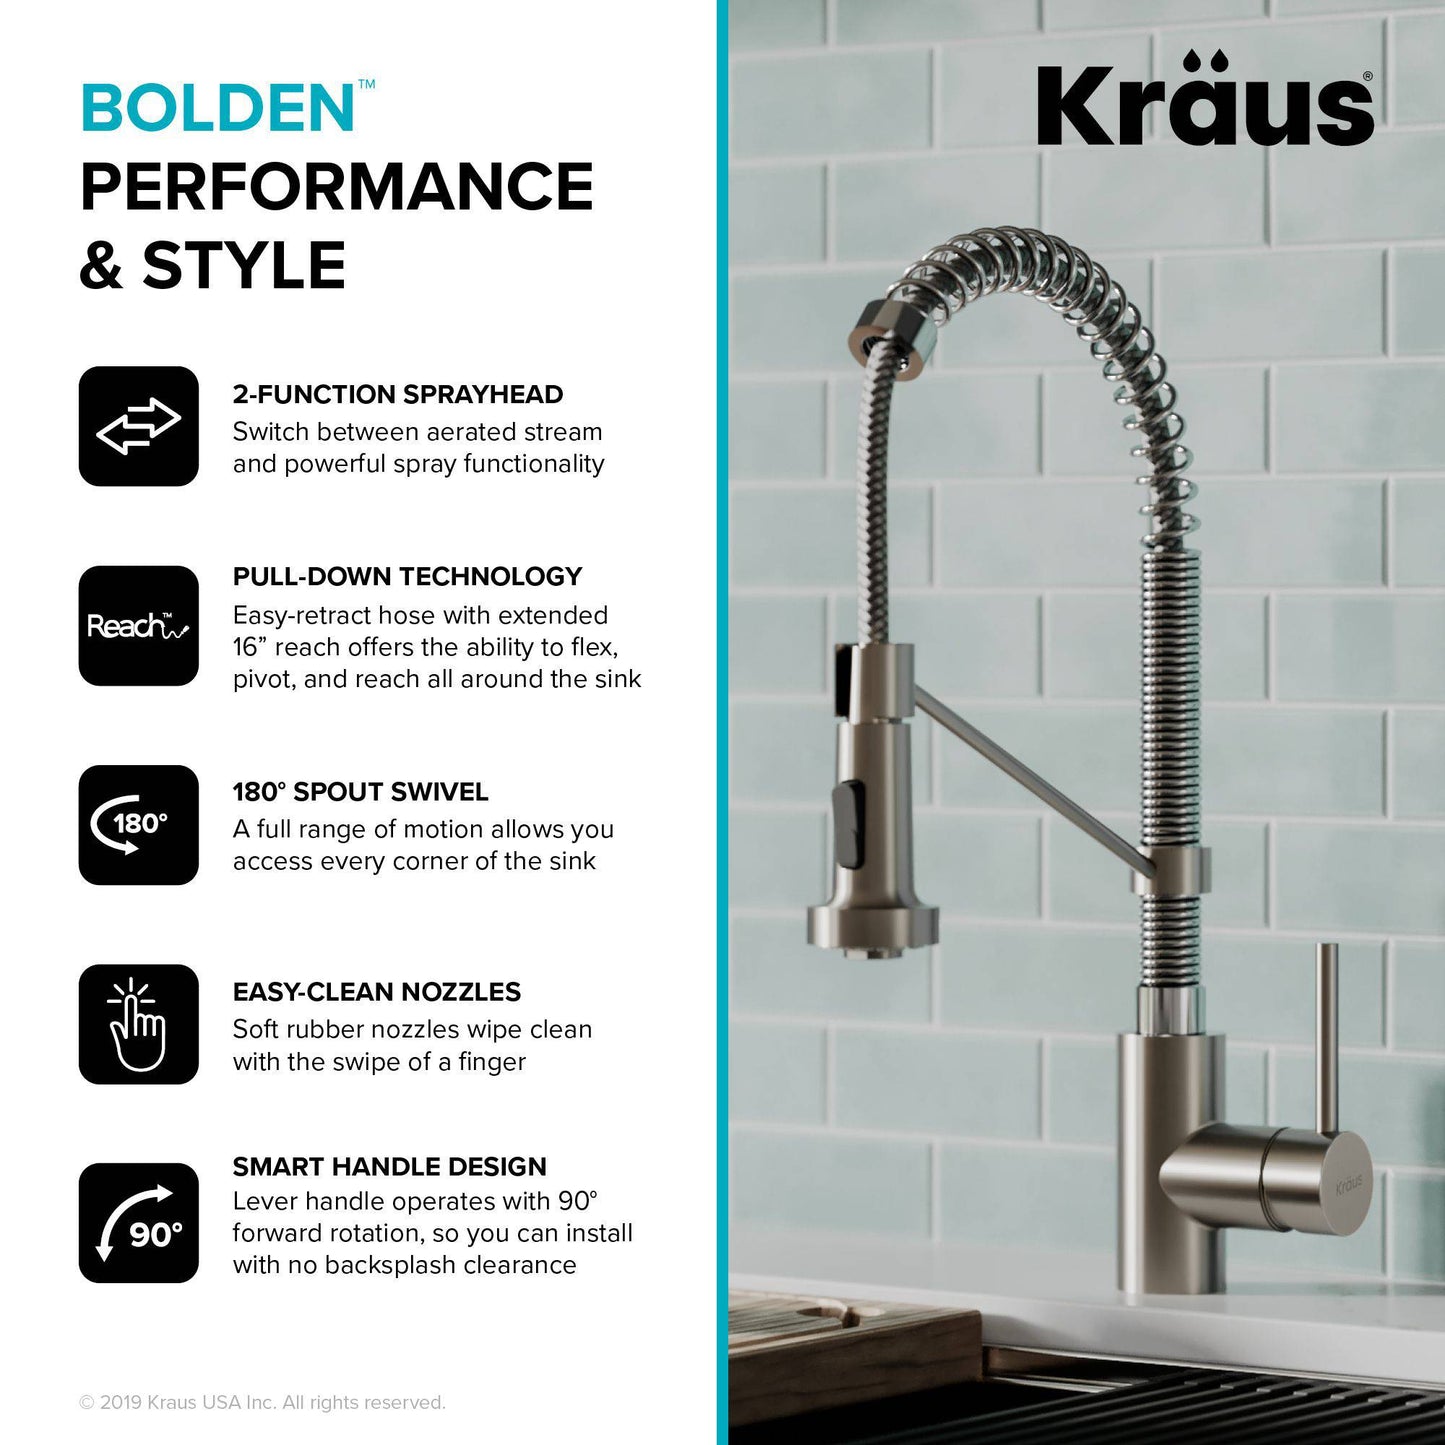 Kraus Bolden 18" Commercial Style Pull-Down Kitchen Faucet in Stainless Steel/Chrome